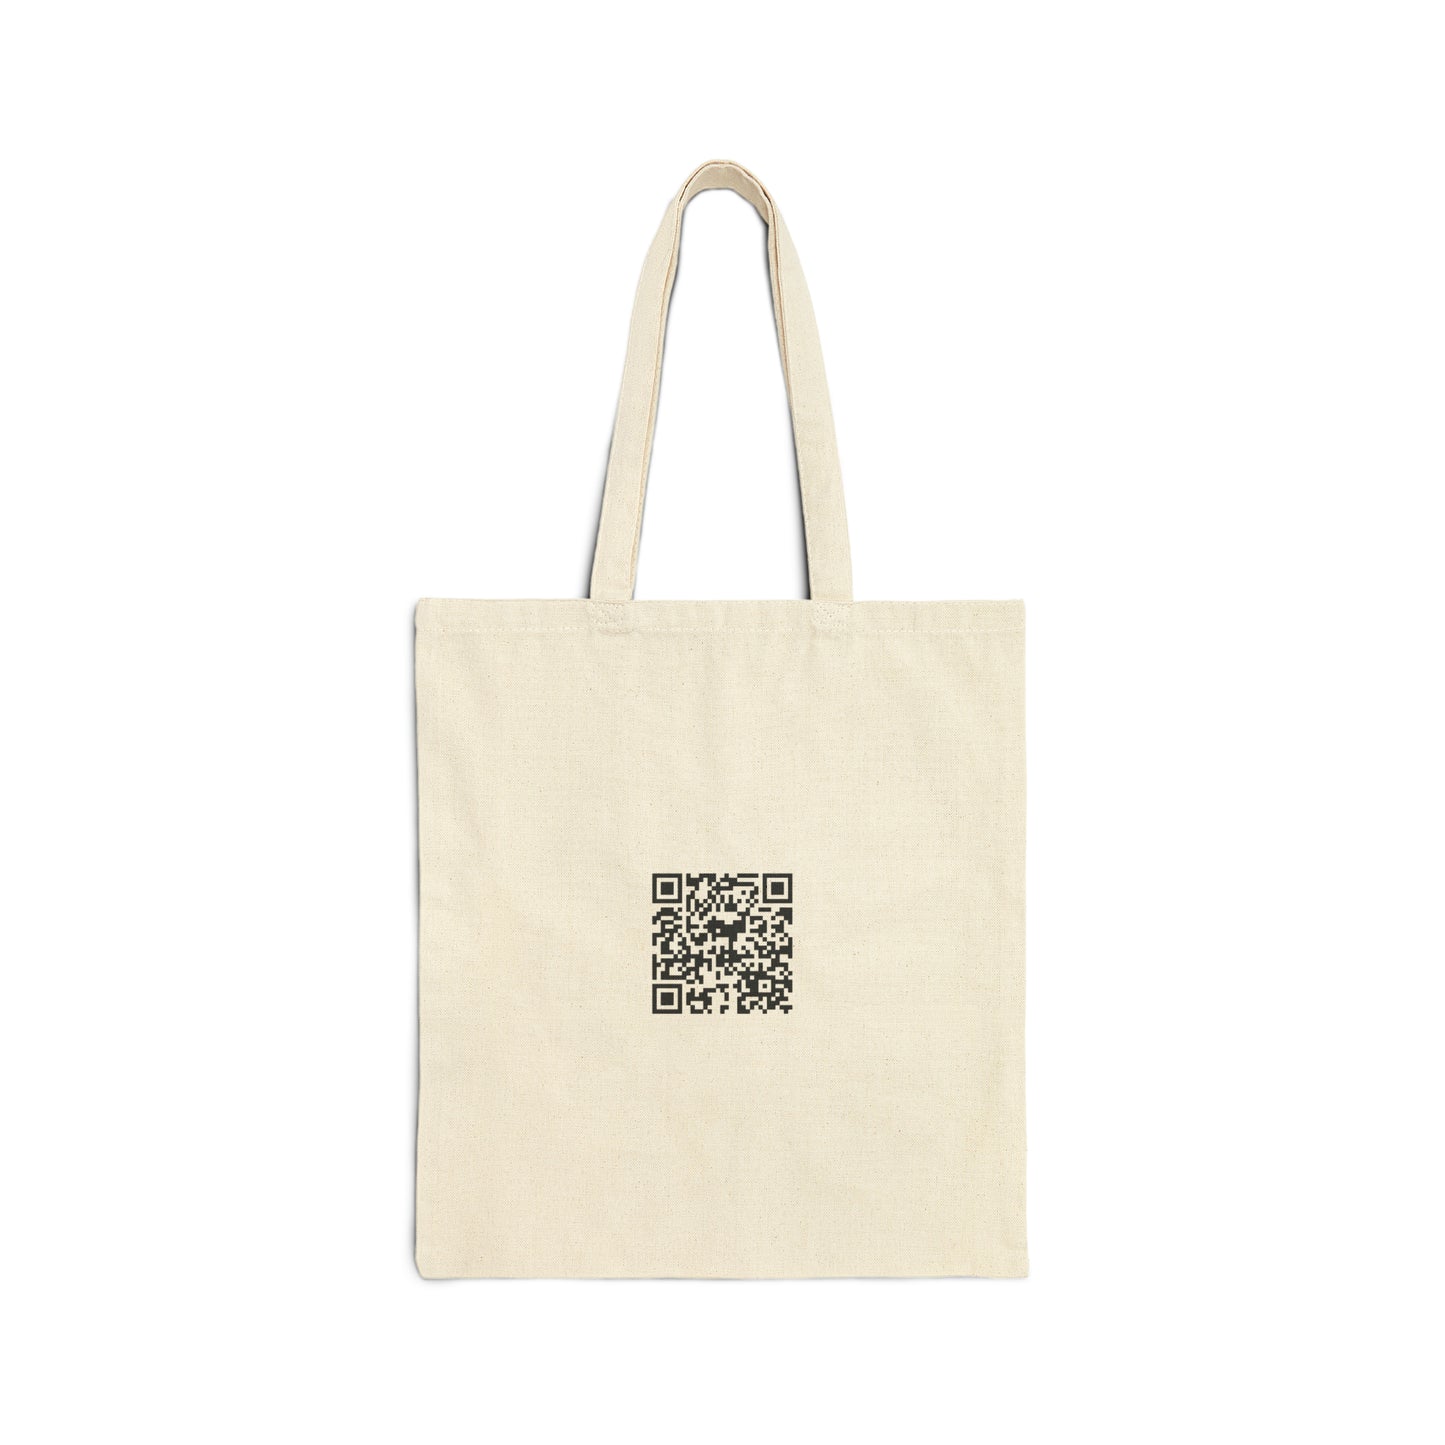 Ashes to Ashes - Cotton Canvas Tote Bag